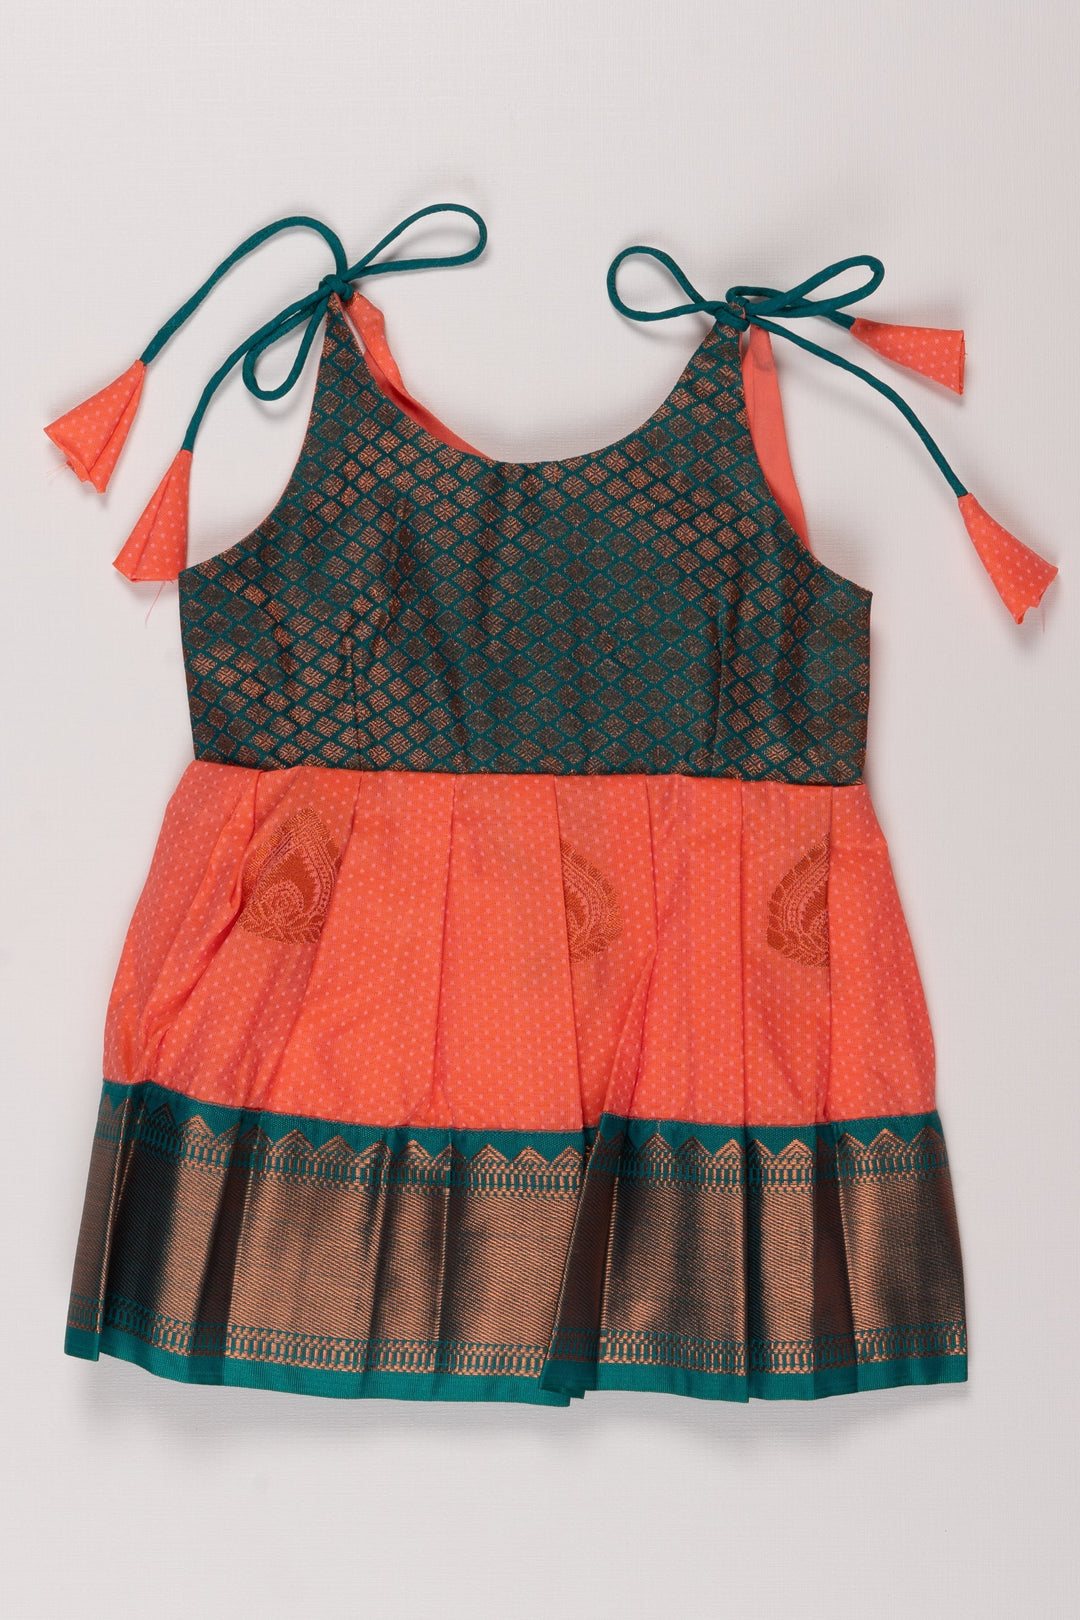 The Nesavu Tie Up Frock Nesavu Coral Gleam Silk Frock with Teal Accents and Traditional Zari Work Nesavu 14 (6M) / Pink / Style 4 T322D-14